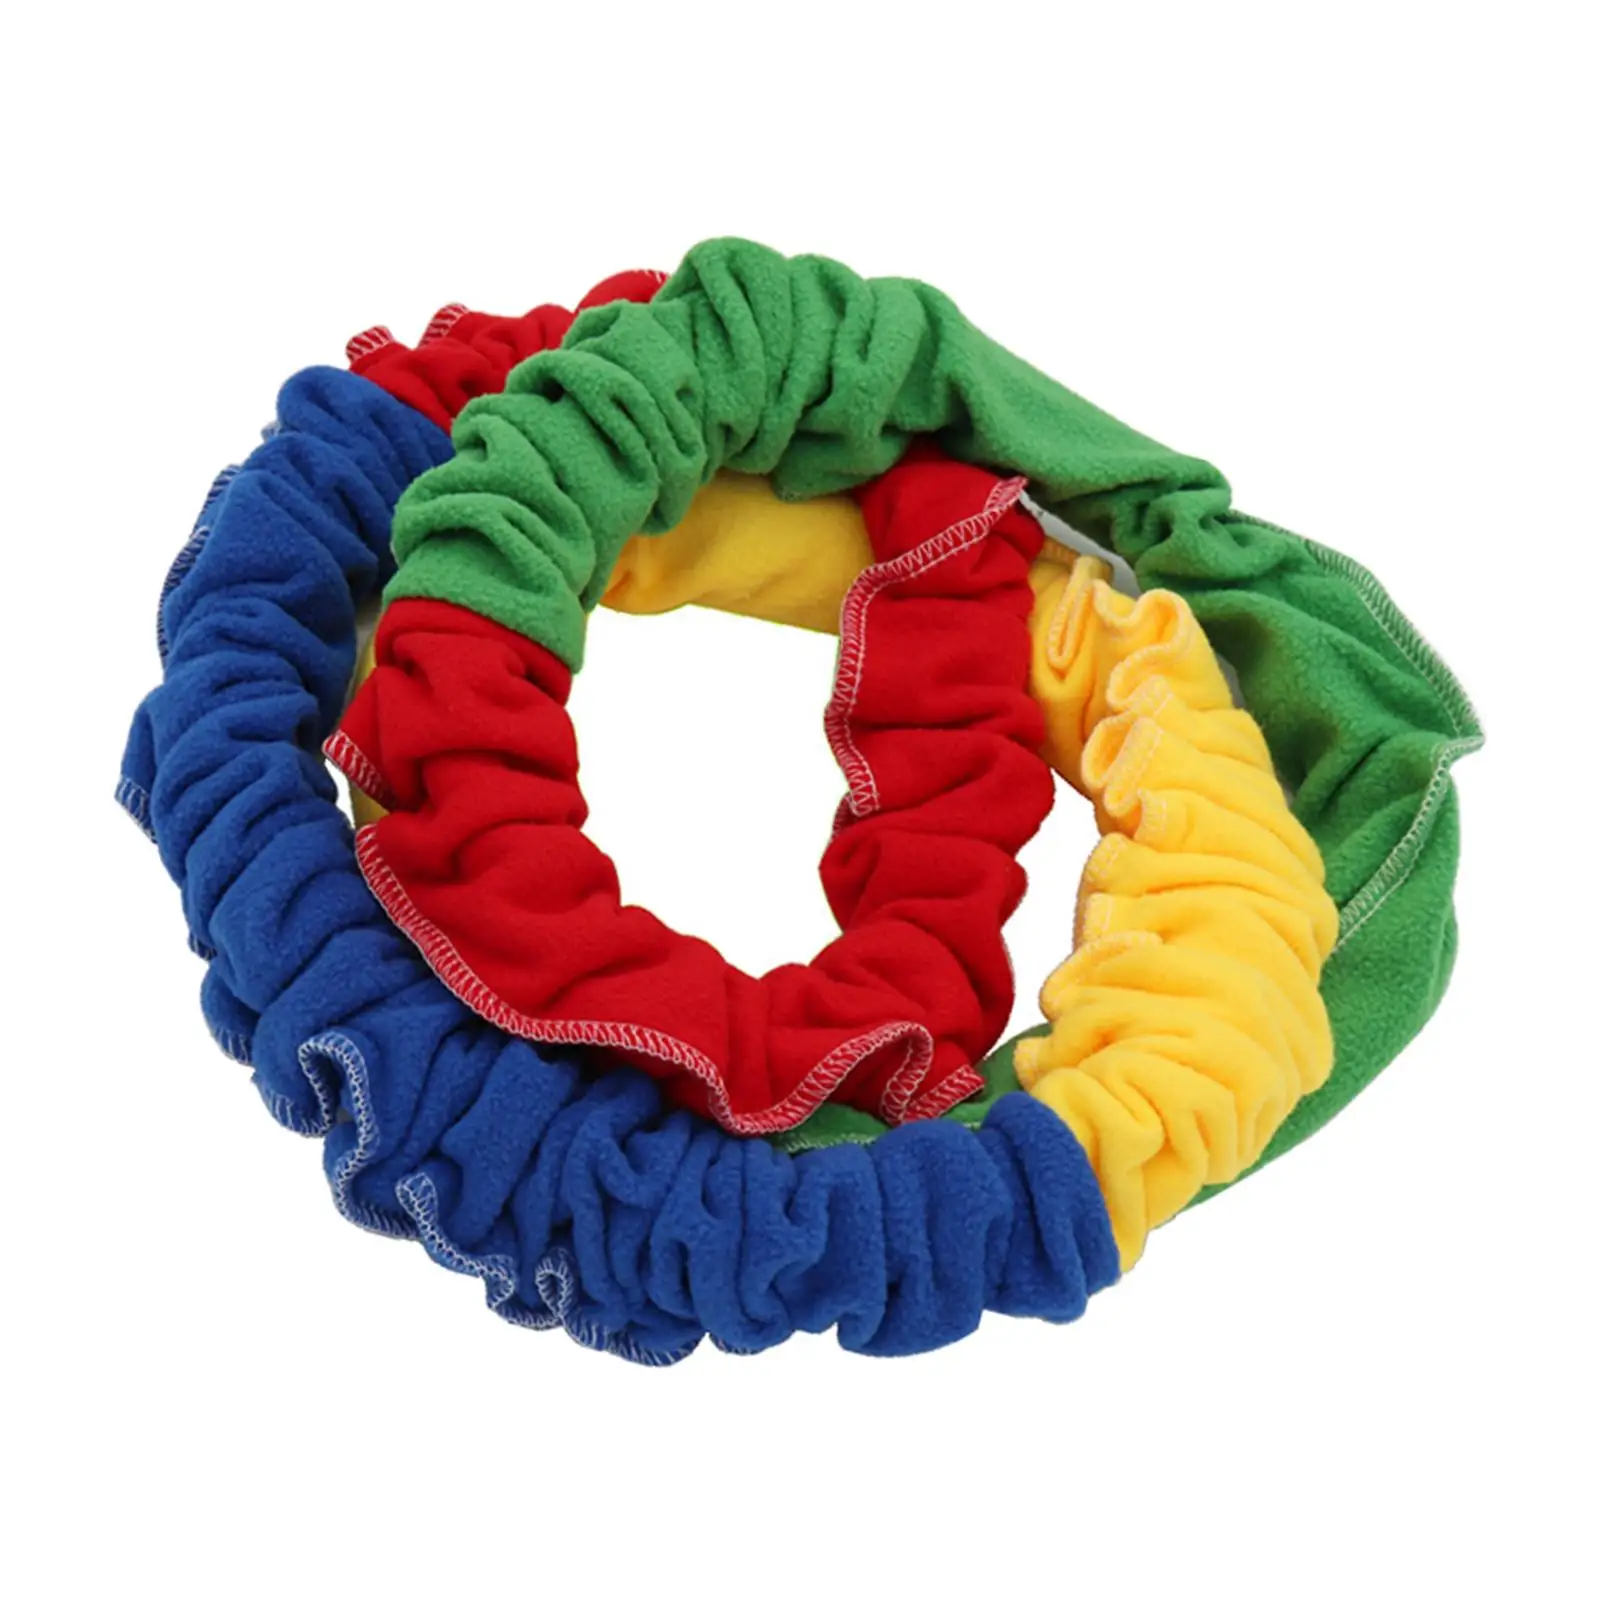 1 Pcs Elastic Fleece Cooperative Stretchy Band Groupwork Play Dynamic Movement Exercise Prop for Playground Activities Child